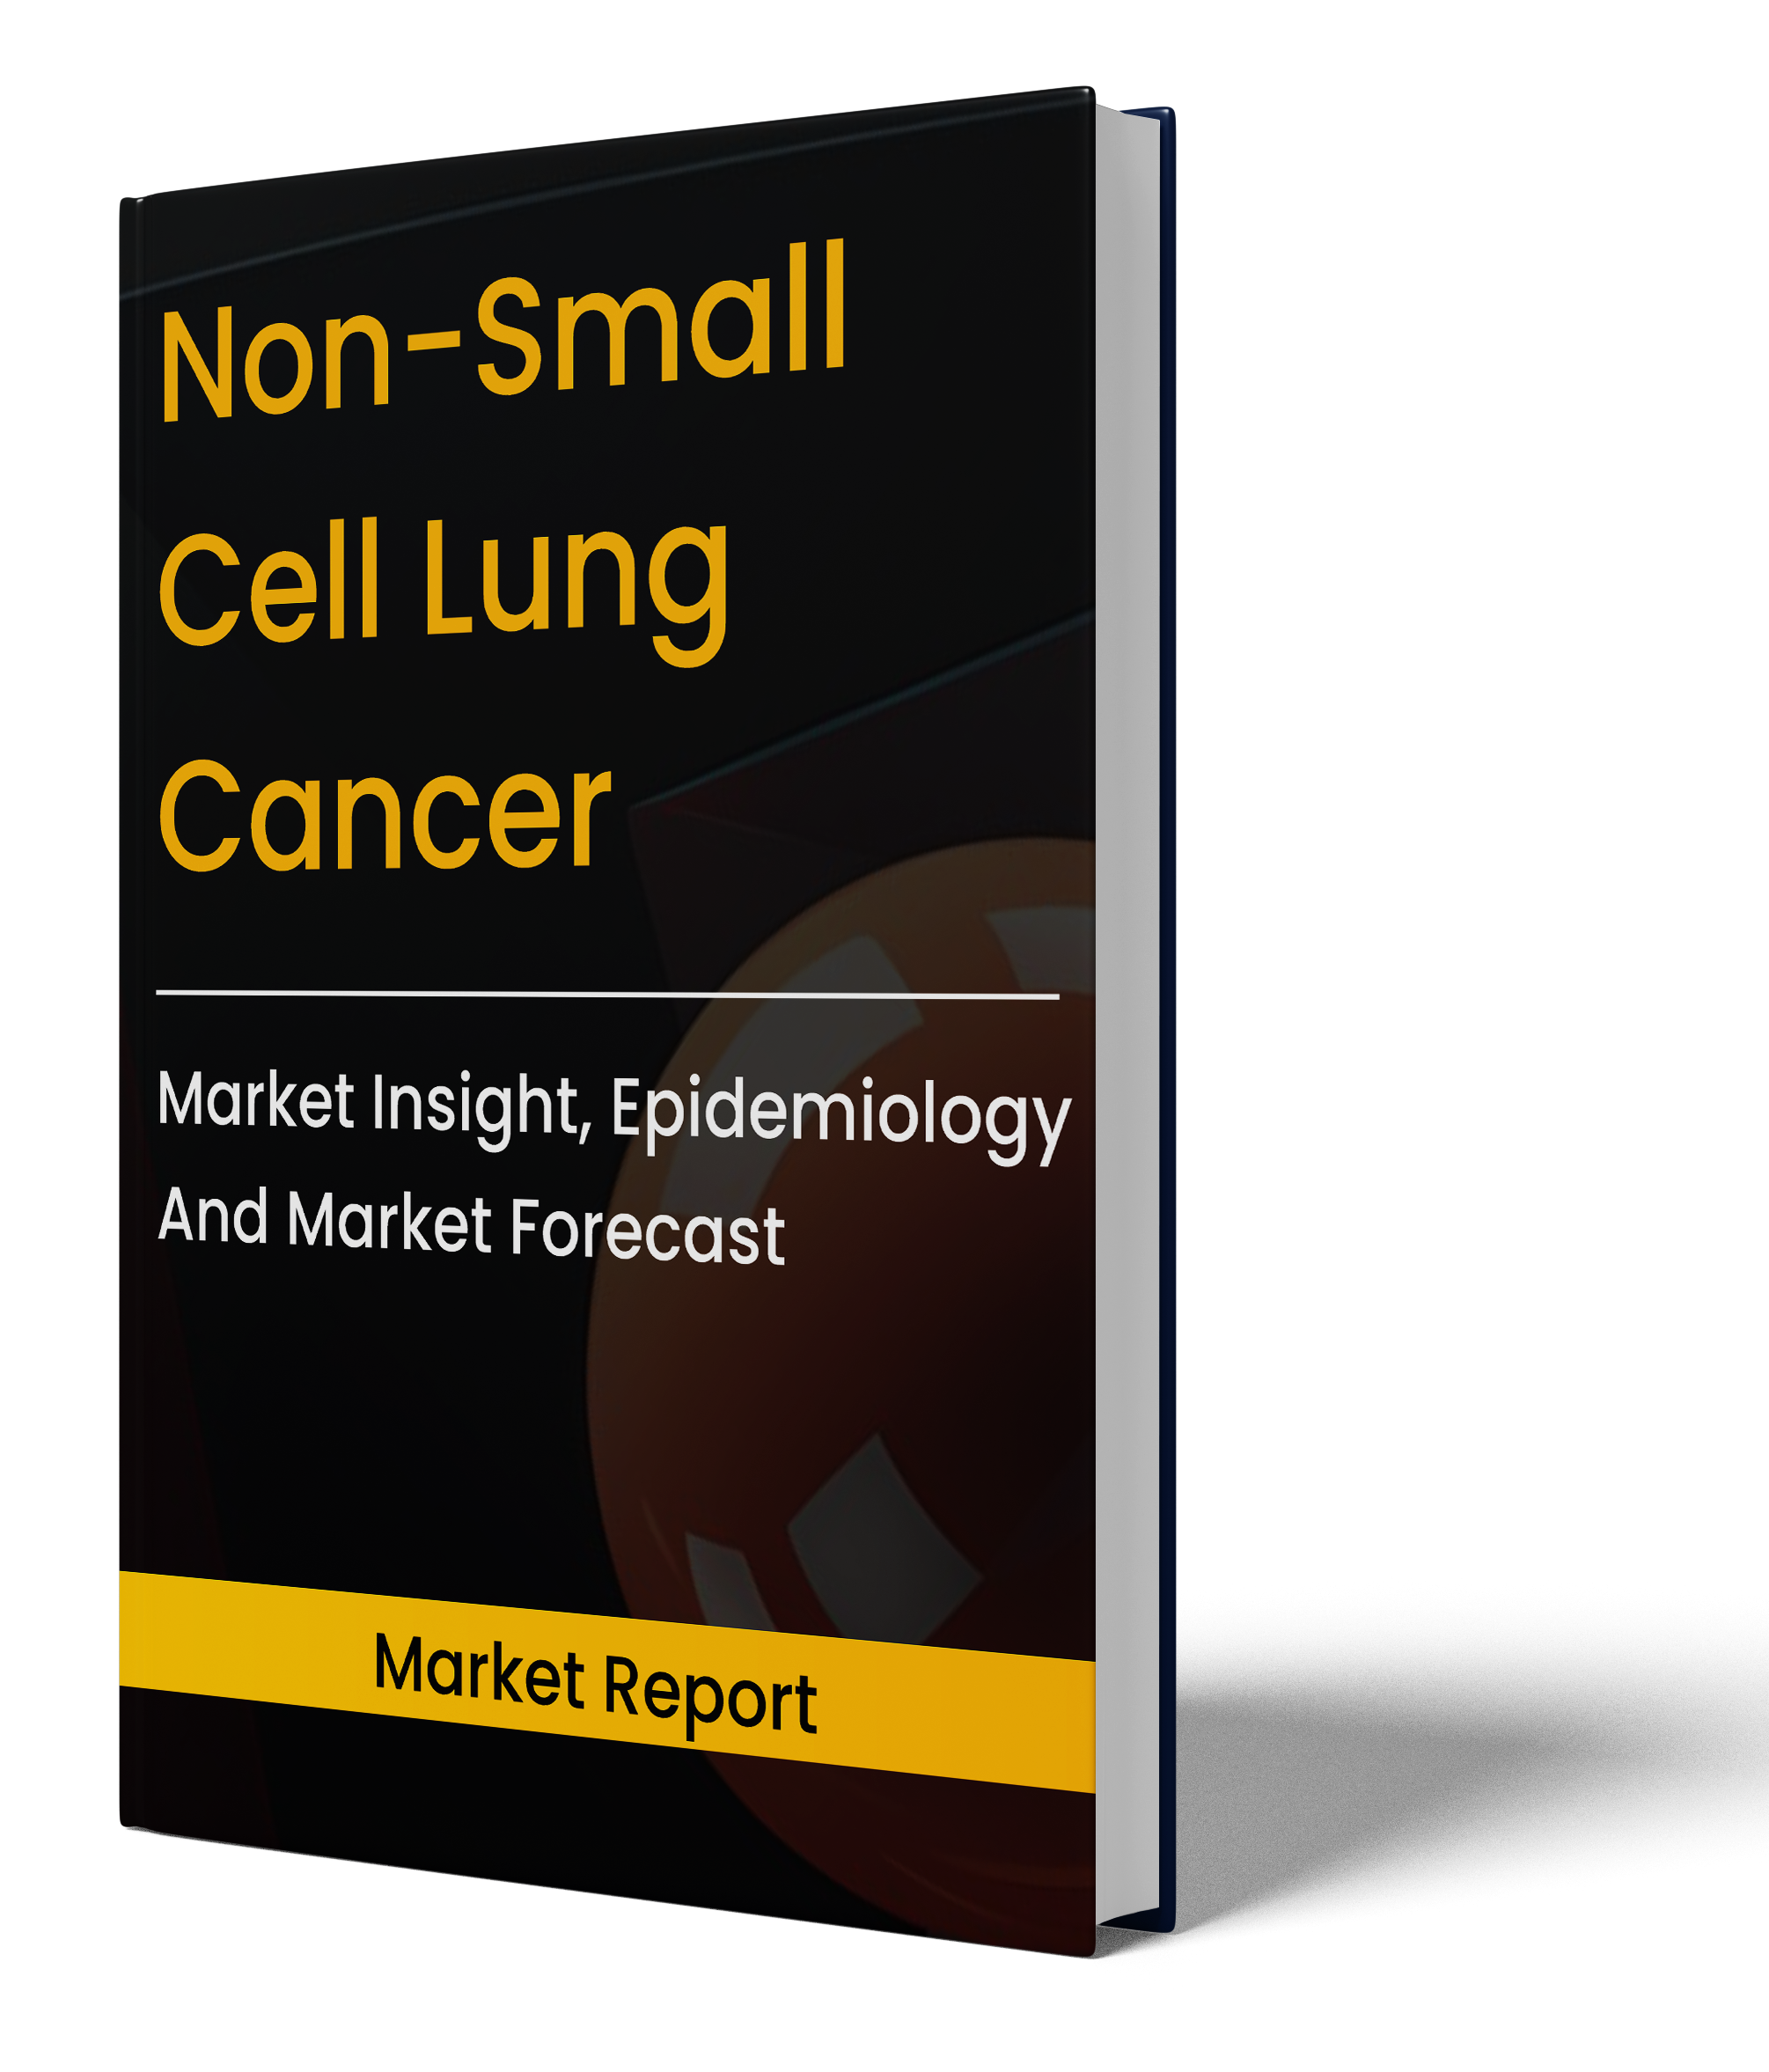 Non-Small Cell Lung Cancer Market Report